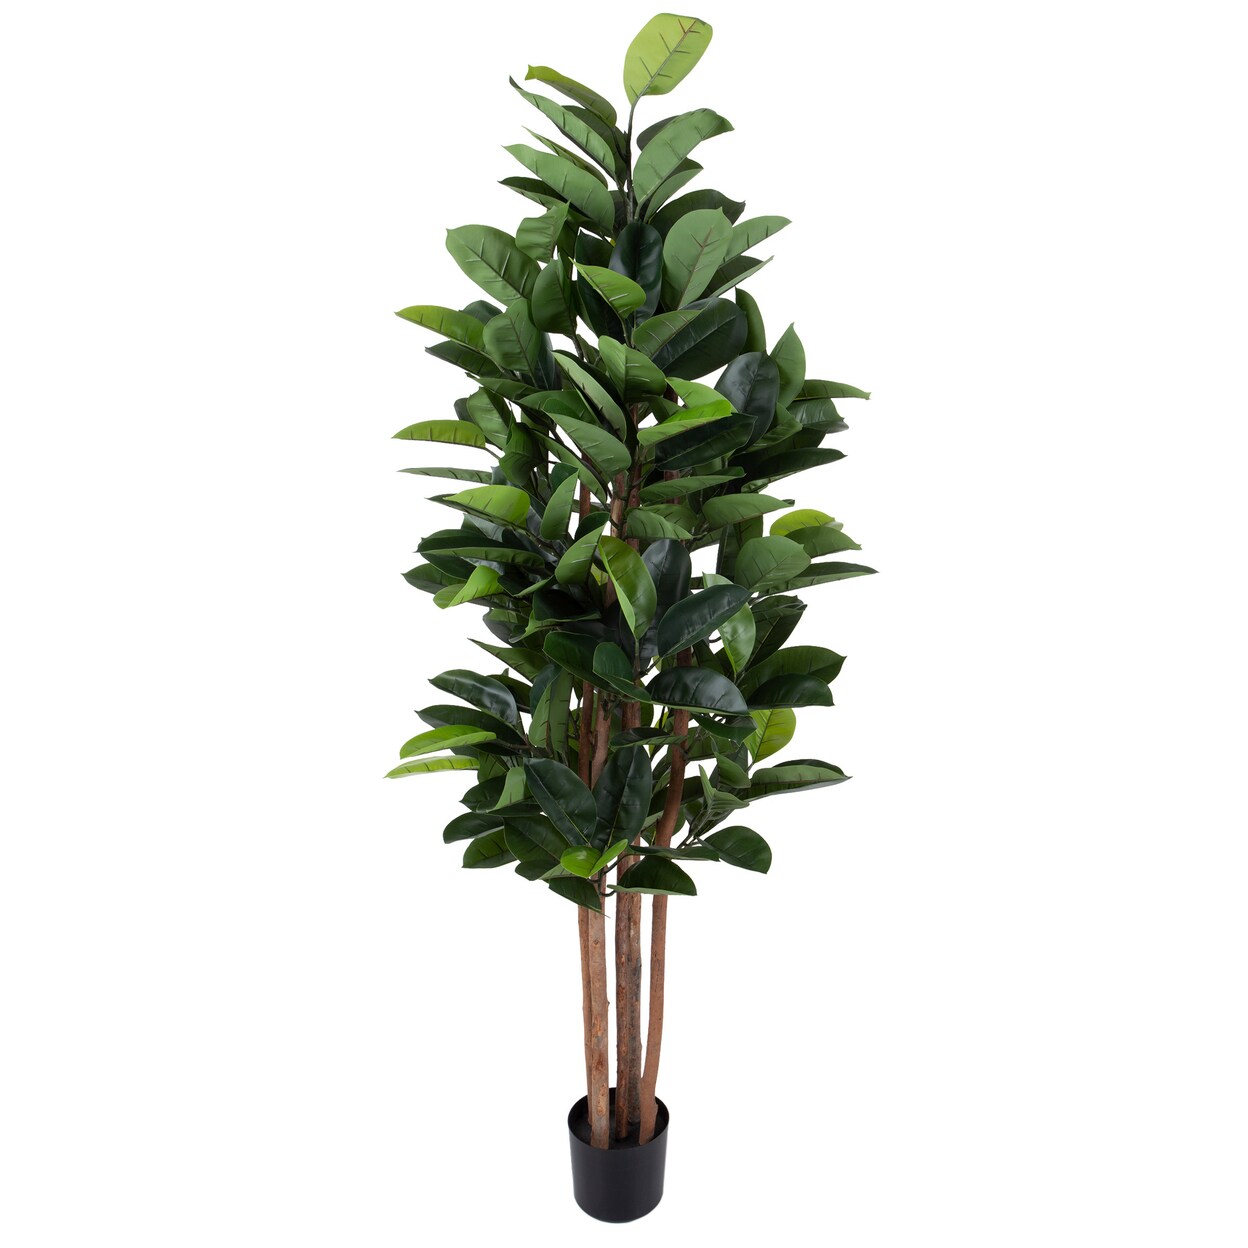 Pure Garden Artificial Rubber Plant 70-Inch Faux Tree with Natural Feel Leaves Indoor